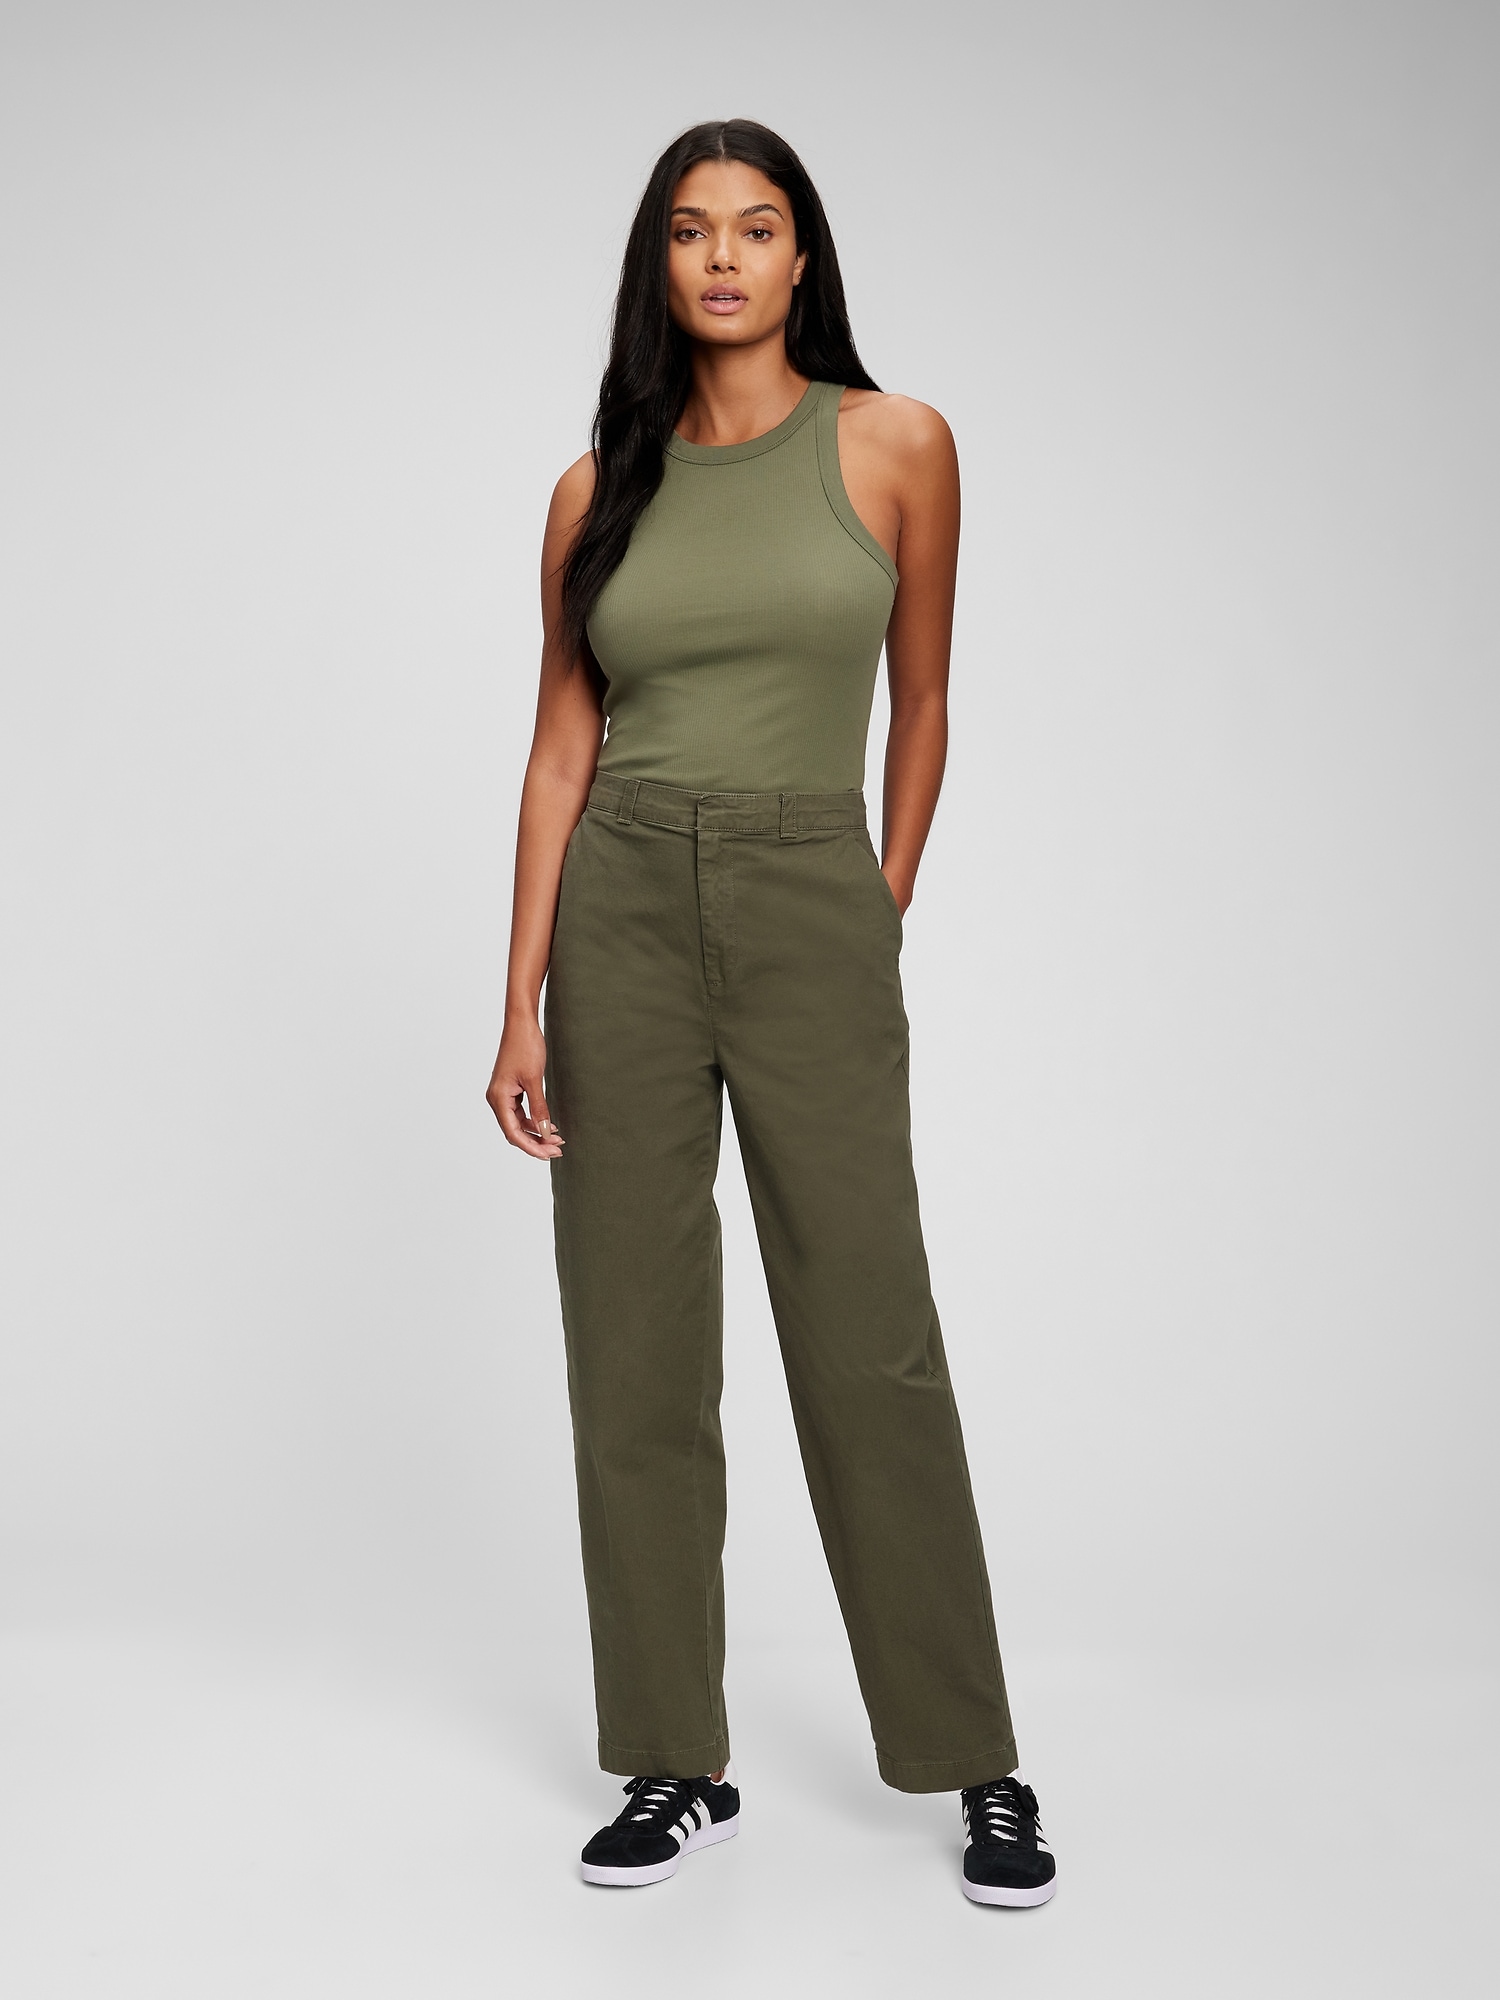 Discover 89+ gap wide leg trousers latest - in.cdgdbentre